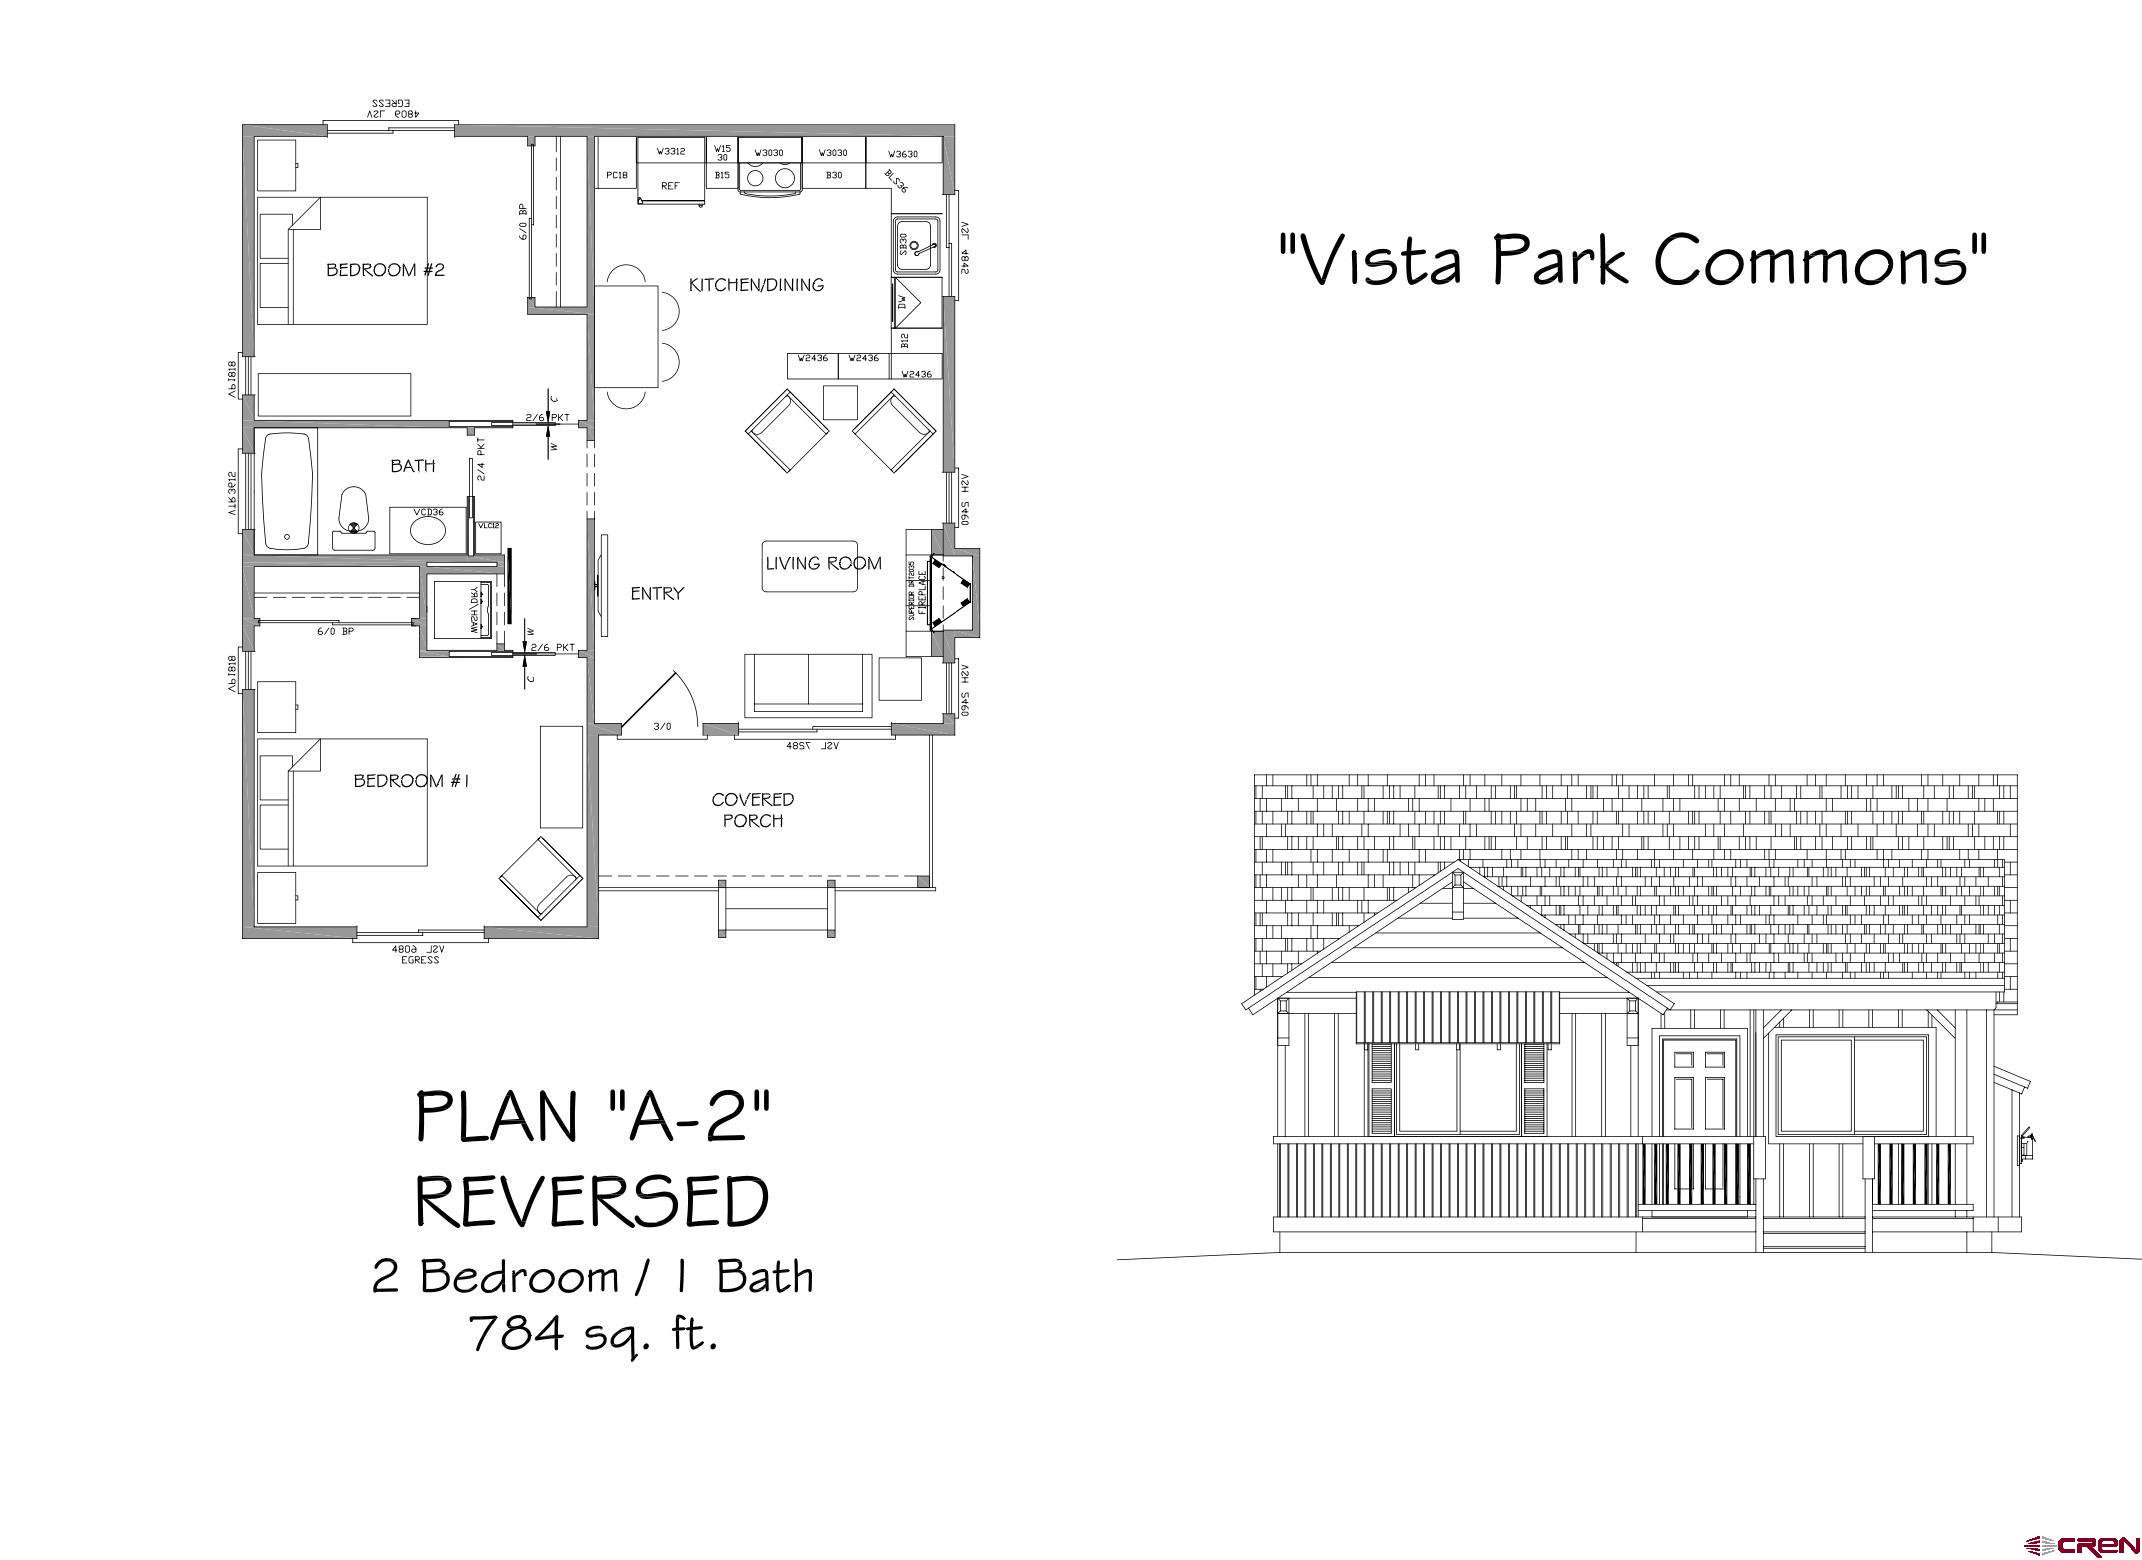 This new construction, 2-bedroom, 1-bath single family home (Plan A-2) is to be built in the newly developed Vista Park Commons subdivision which consists of 23 small single family detached homes that wrap around a common green space. All homes are socially friendly with generous front porches and small front yards that open onto the common area. Vista Park Commons is a pedestrian centric walkable community with vehicle parking outside of the commons park area.  There will be a common clubhouse and pool.  Although these homes are on the smaller square footage side, they offer open floor plans that feel very spacious. Each home will be assigned its own parking spaces and storage units.  All homes are to be built in full code compliance with Town of Ridgway latest adoption of the 2018 (IBC) International Building Code and to a high-quality industry standard. Included in the Town of Ridgway’s IBC code adoption is a very high standard for building envelope insulation and air infiltration. All homes will have “all electric”: appliances, water heaters, heat pump - heating & air systems, and modern electric fireplaces in all Plans A,B,C,D units (no fireplaces in Plan E studio units).  This  home on Lot 1 is nicely located on the north end of the subdivision offering wonderful views of the Sneffels Mountain Range.